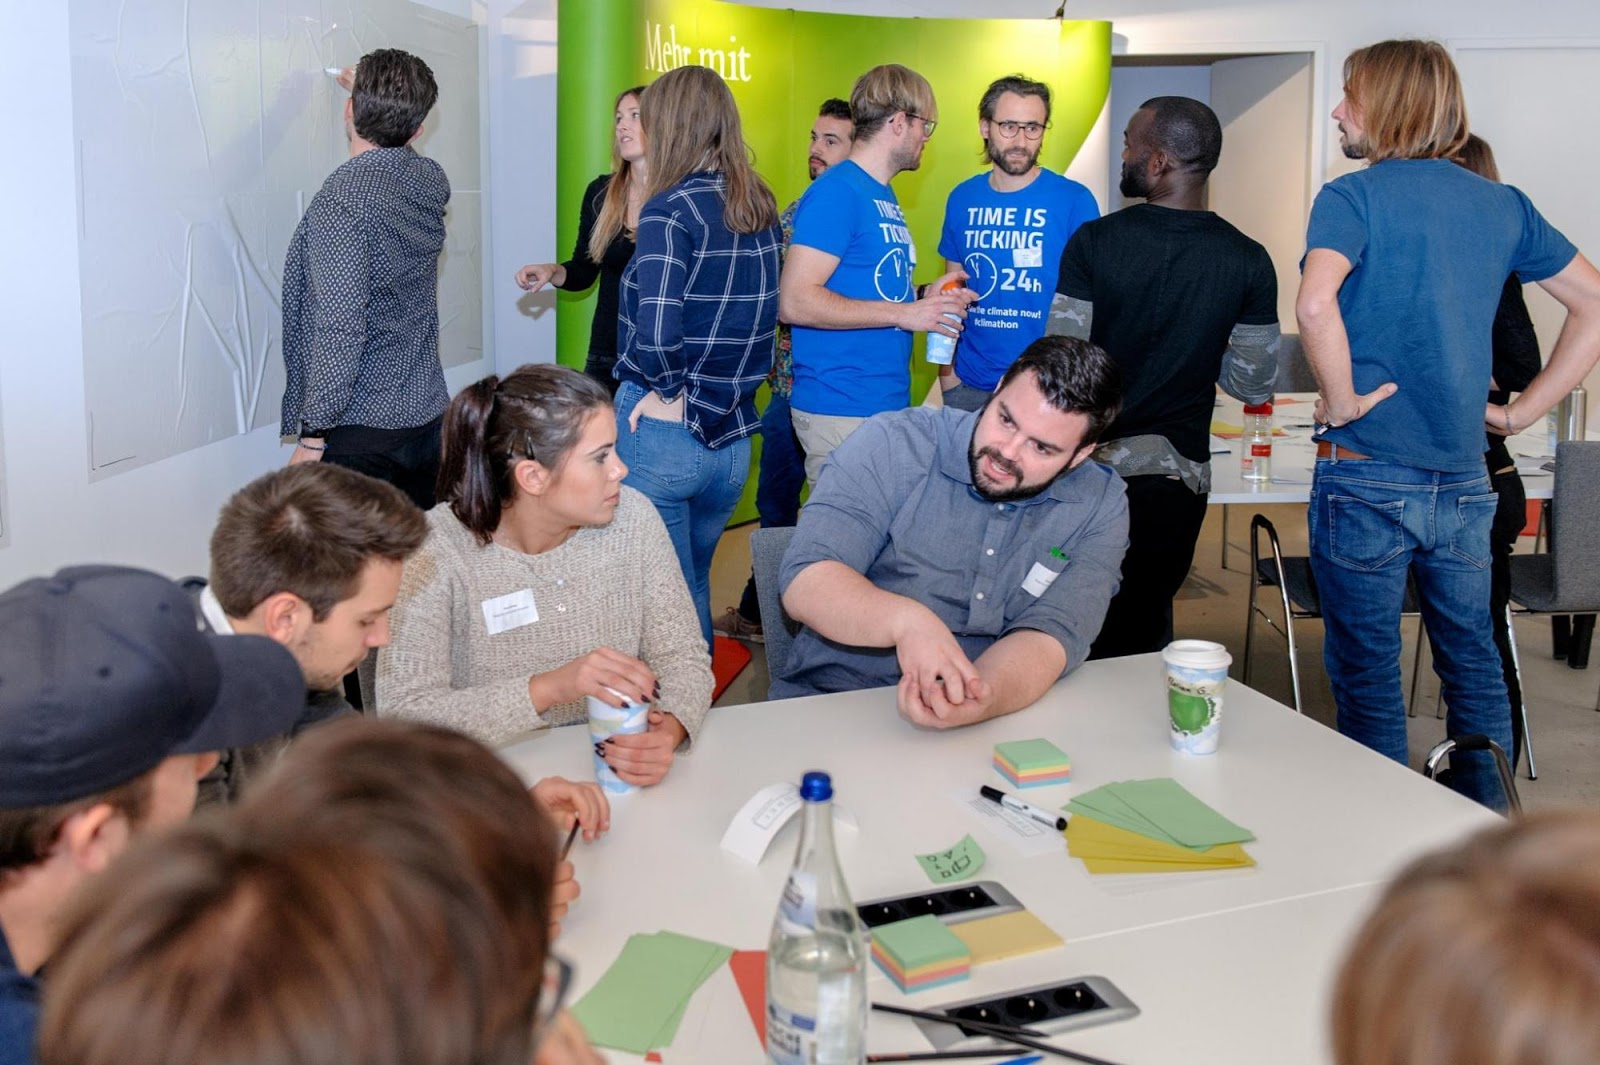 Science Shop Wuppertal’s pilot project “Climathon Wuppertal 2018”co-organised by the Neue Effizienz, the University of Wuppertal, the Wuppertal Institute and Climate Kic.